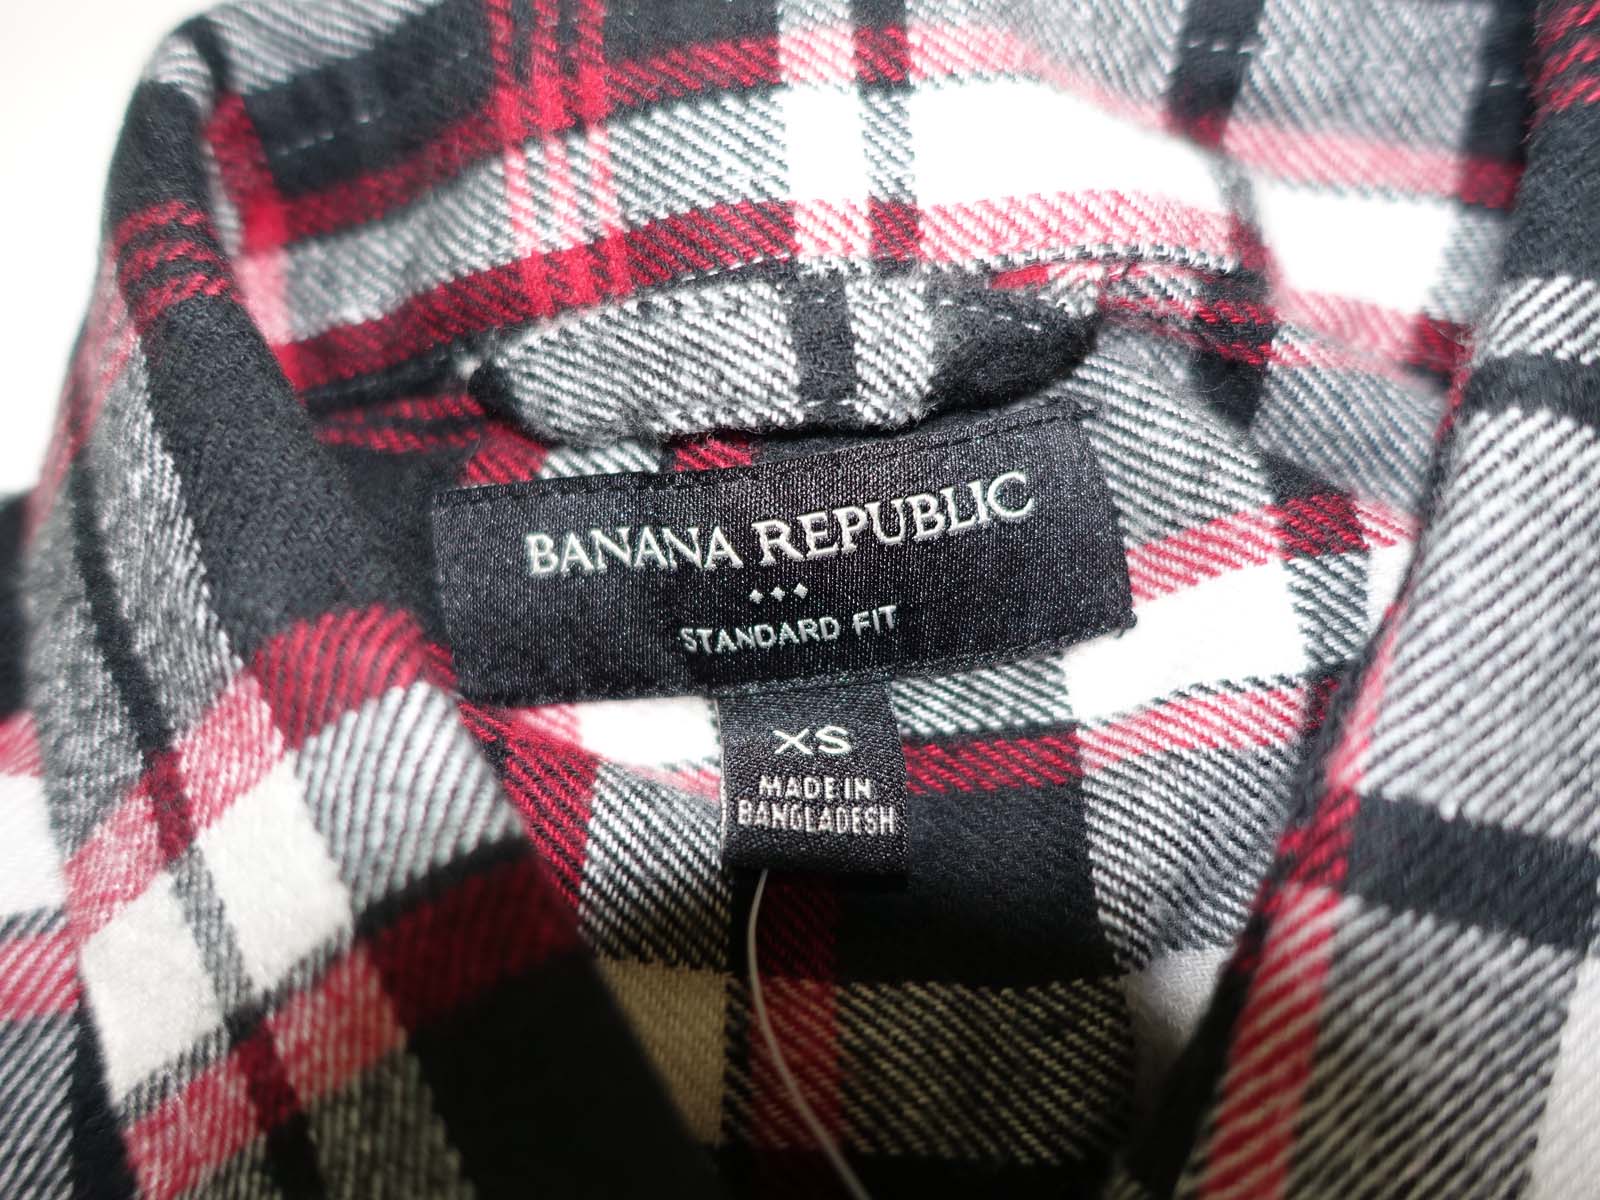 Banana Republic Men's Standard Fit Flannel Shirt Size XS NWT Red White ...